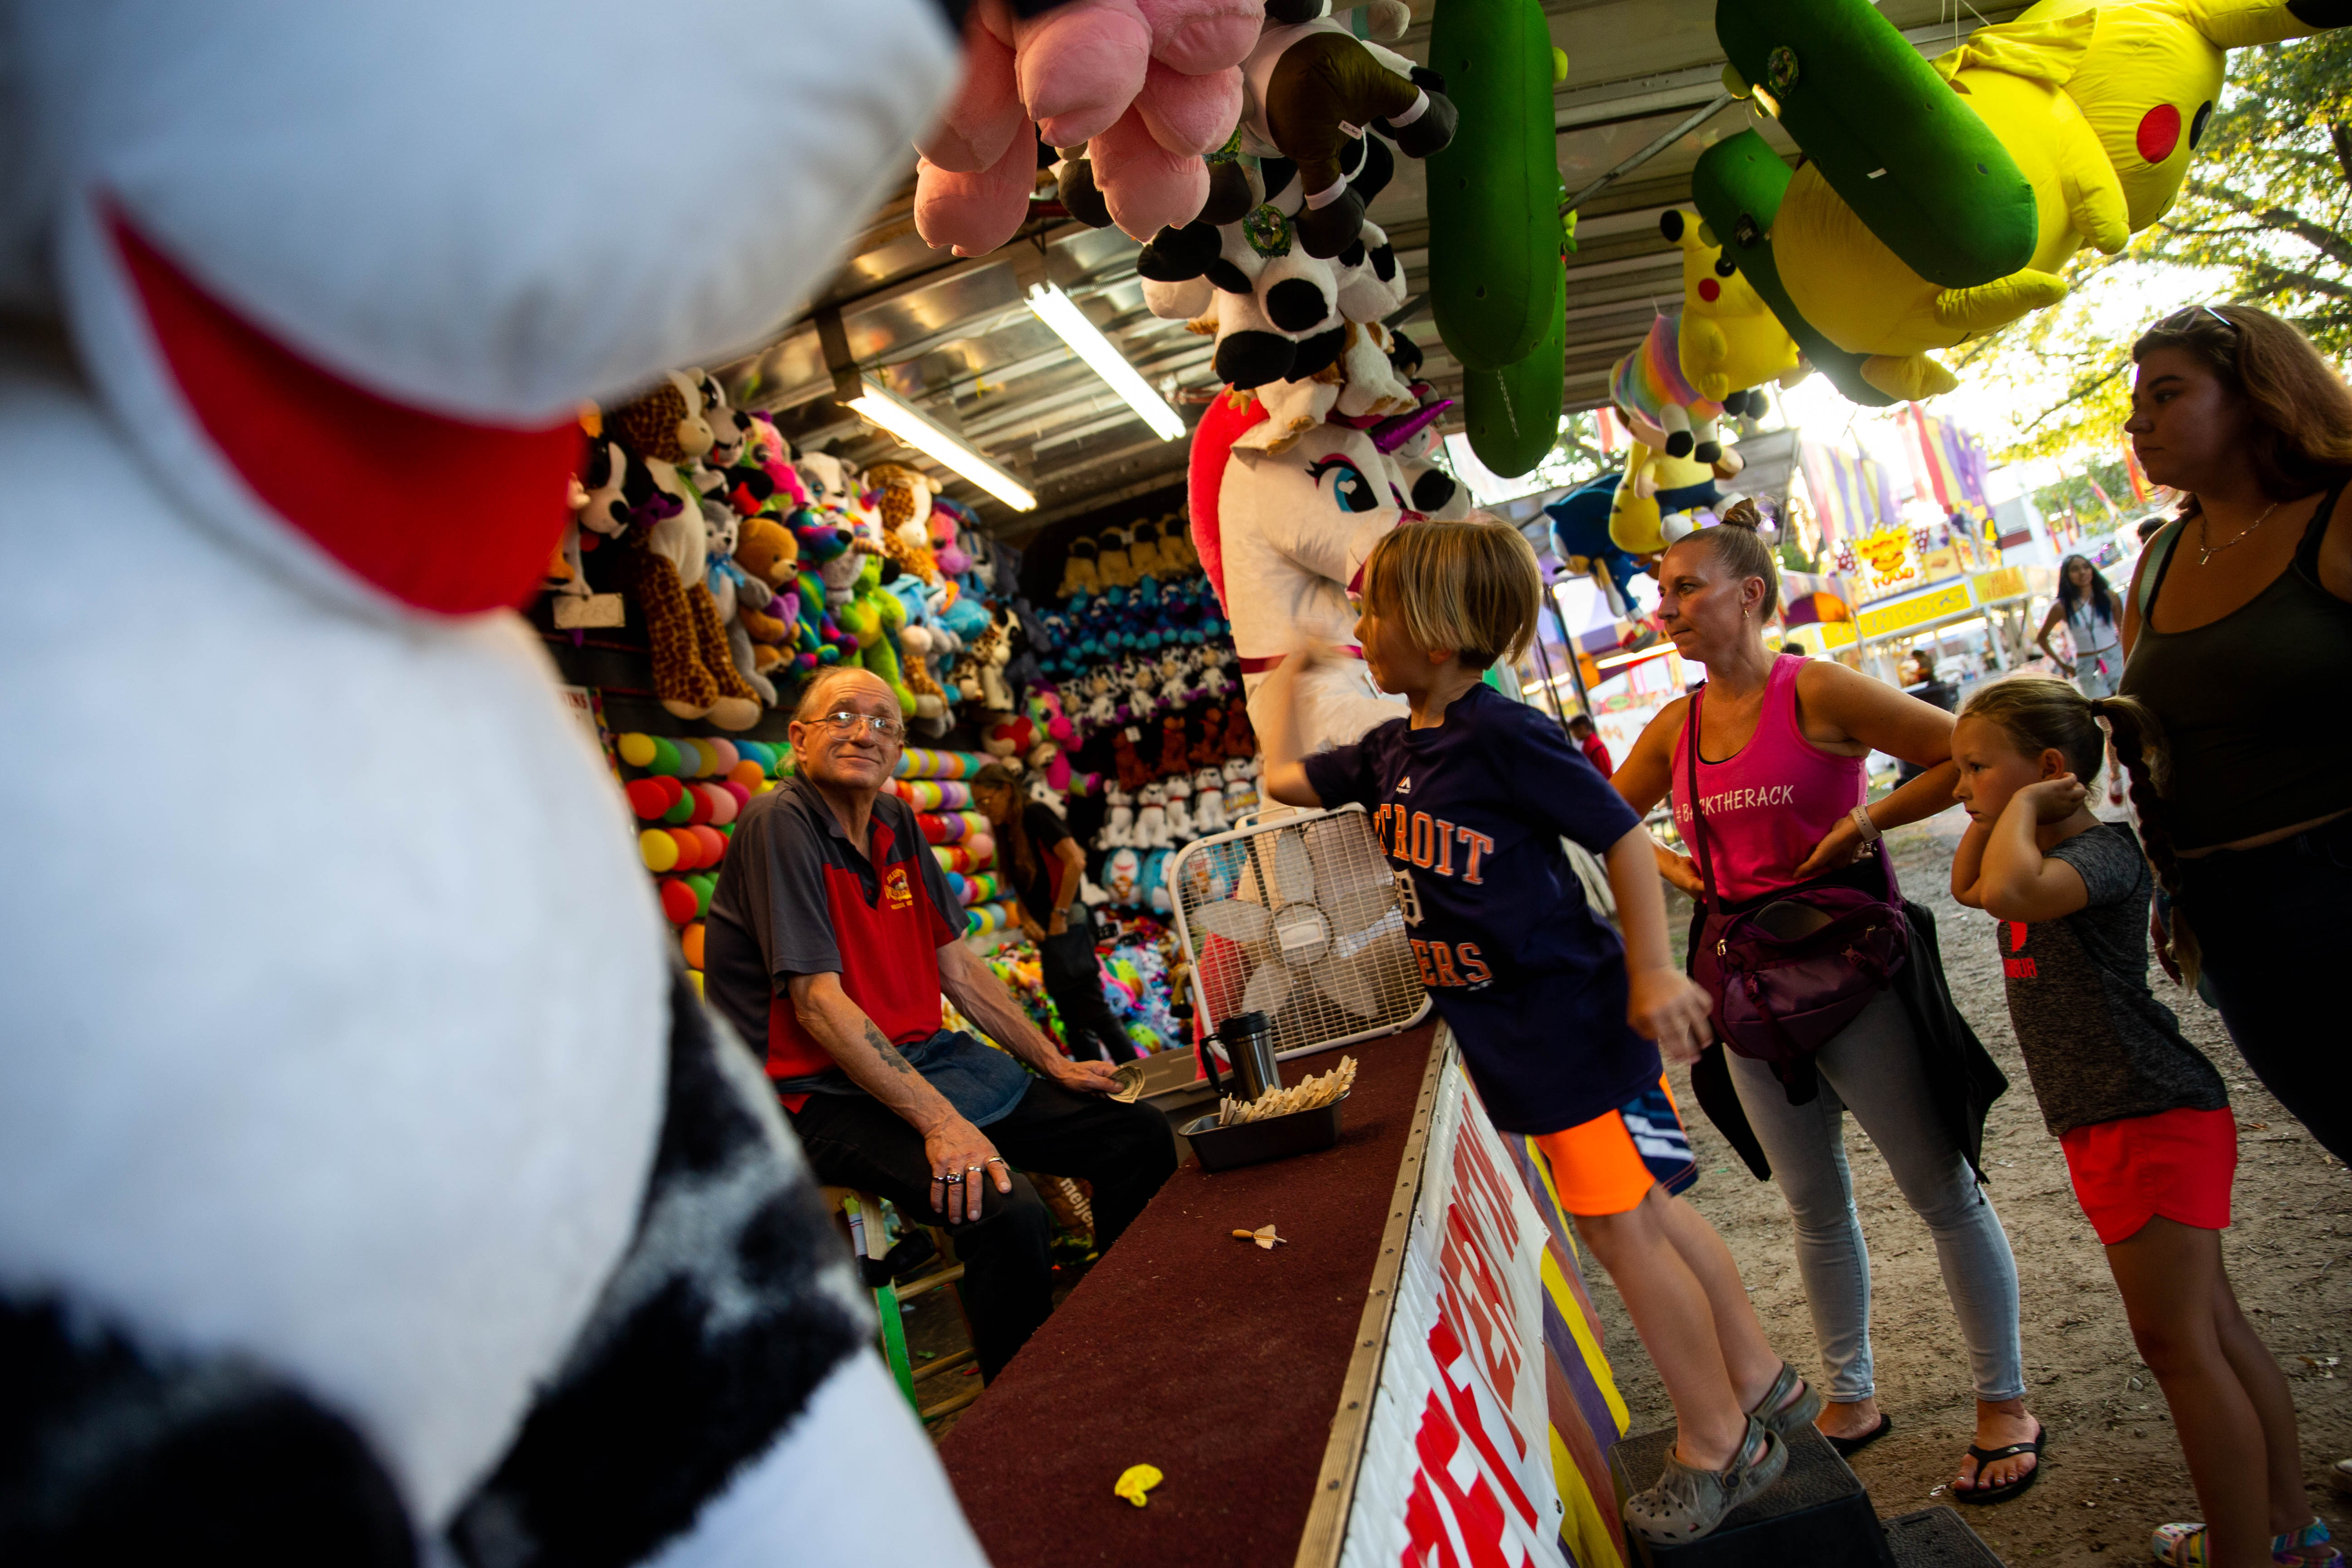 A young fair-goer throws darts as they play games on the midway Wednesday, July 27, 2022, at the Ottawa County Fairgrounds.